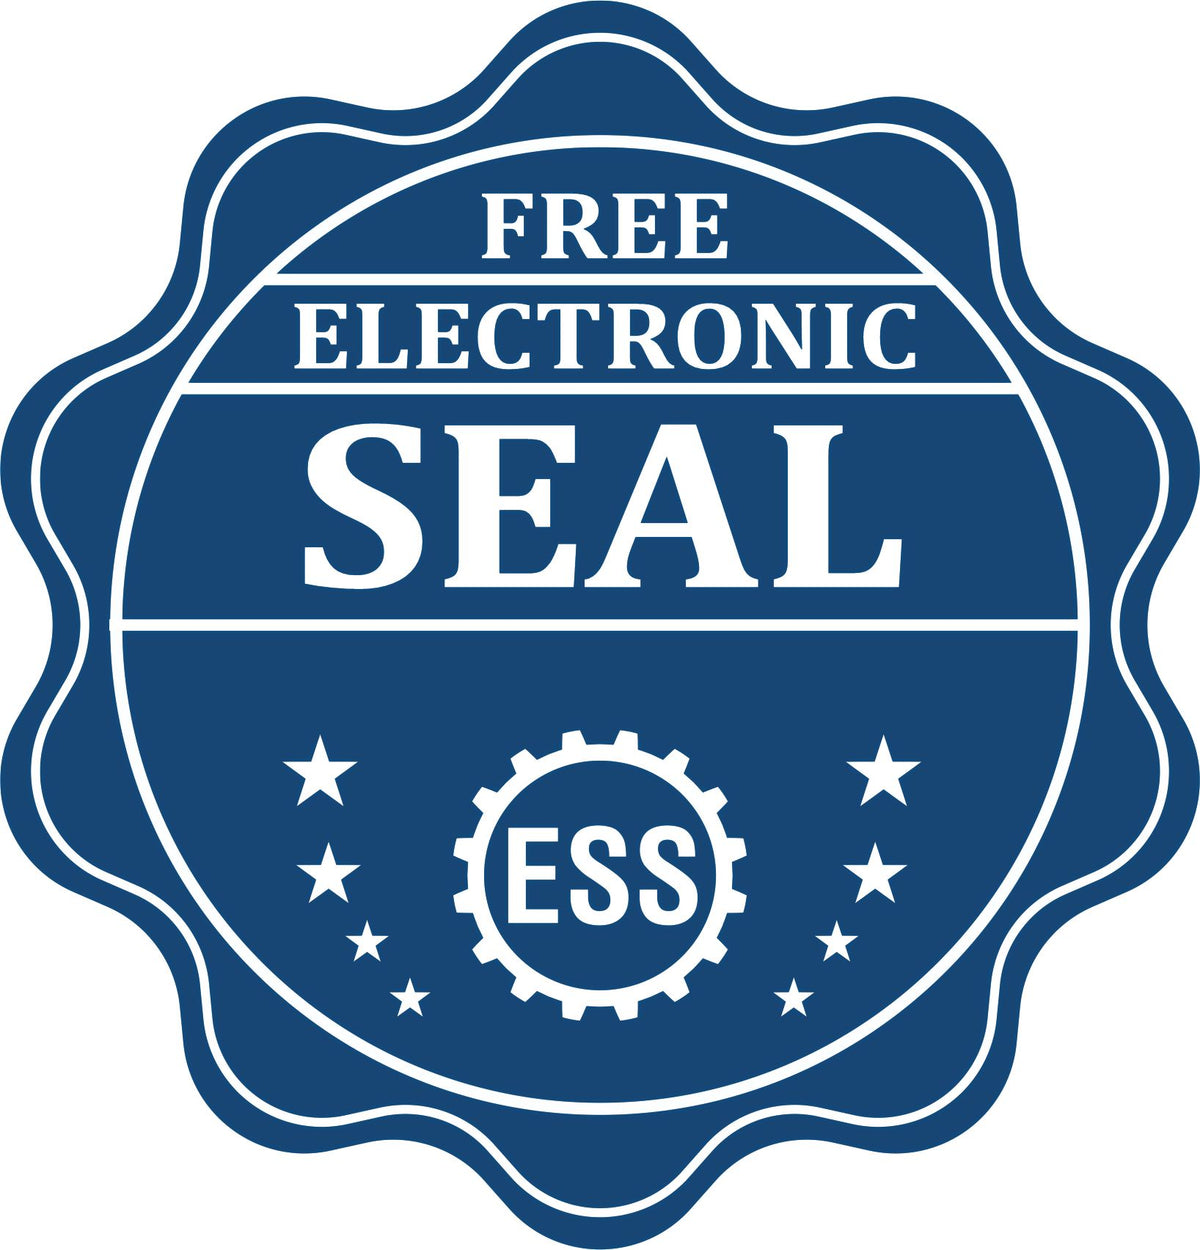 A badge showing a free electronic seal for the Handheld Arizona Professional Engineer Embosser with stars and the ESS gear on the emblem.